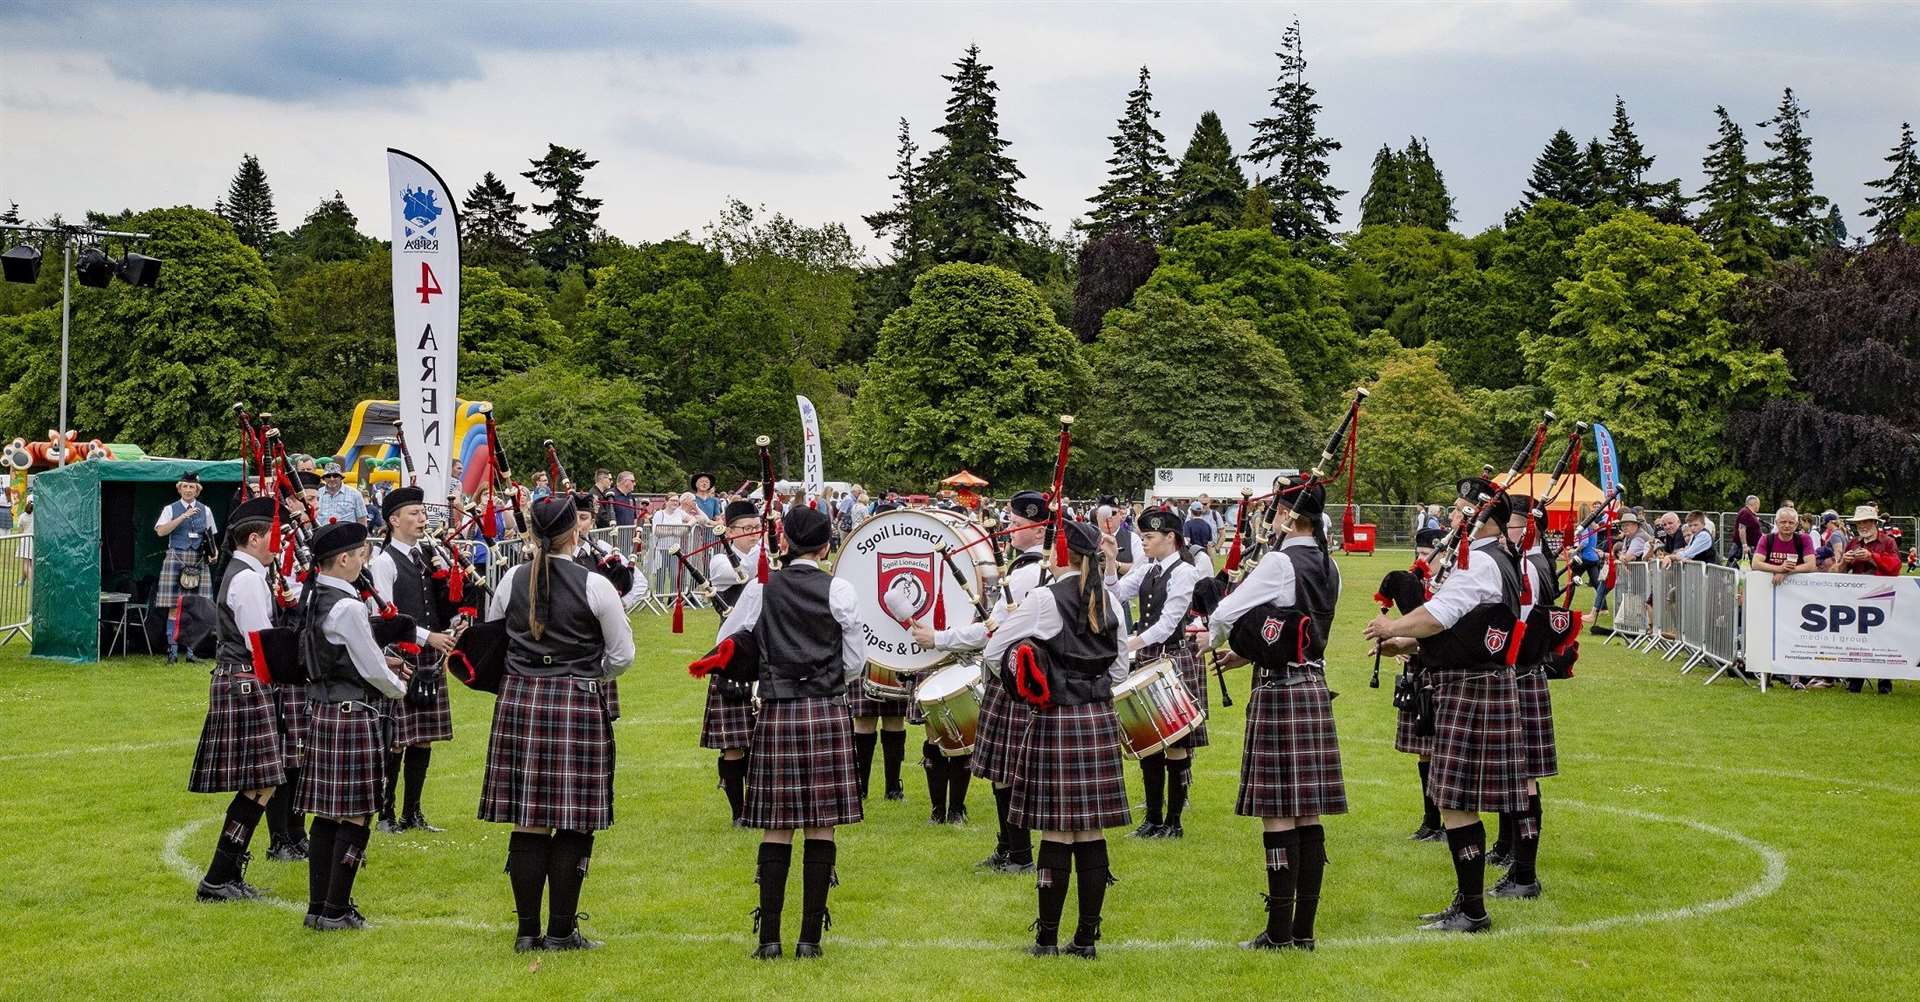 Piping Inverness 2019.